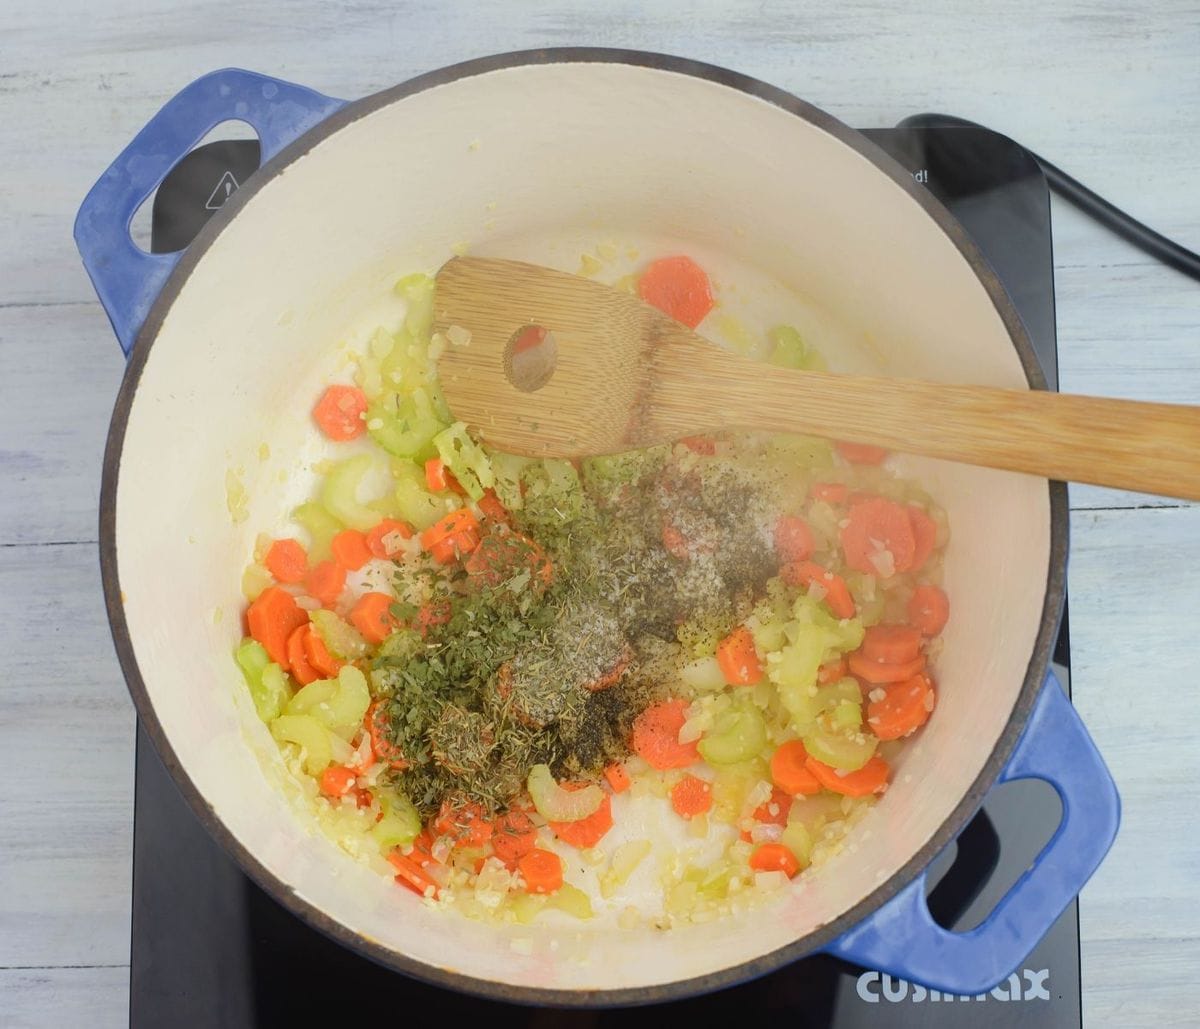 Adding seasonings to soup vegetables in the pot.